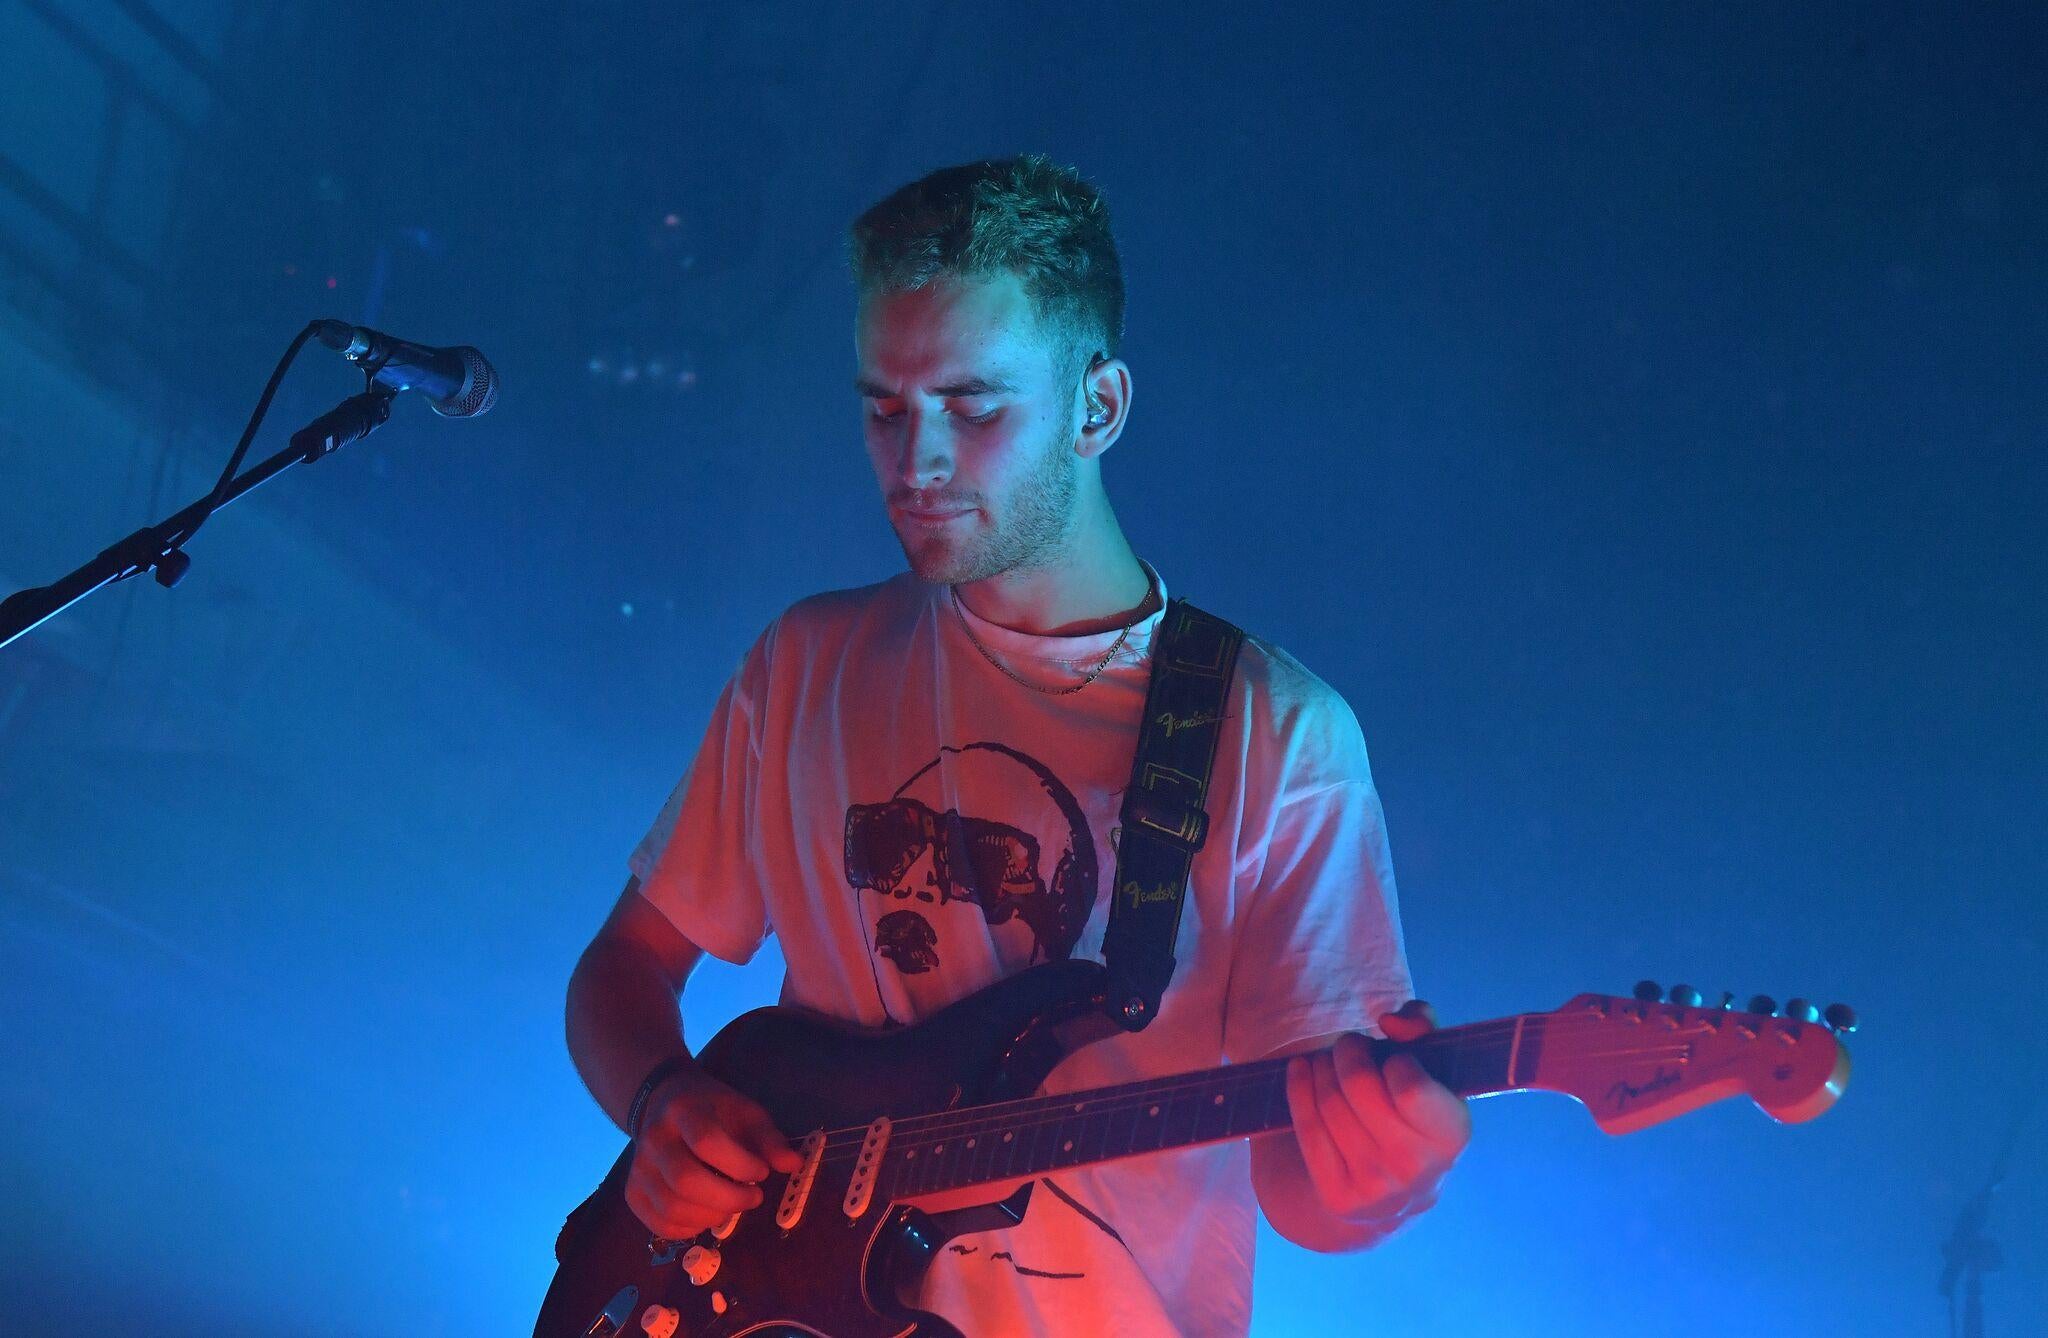 Tom Misch performs at Printworks in London